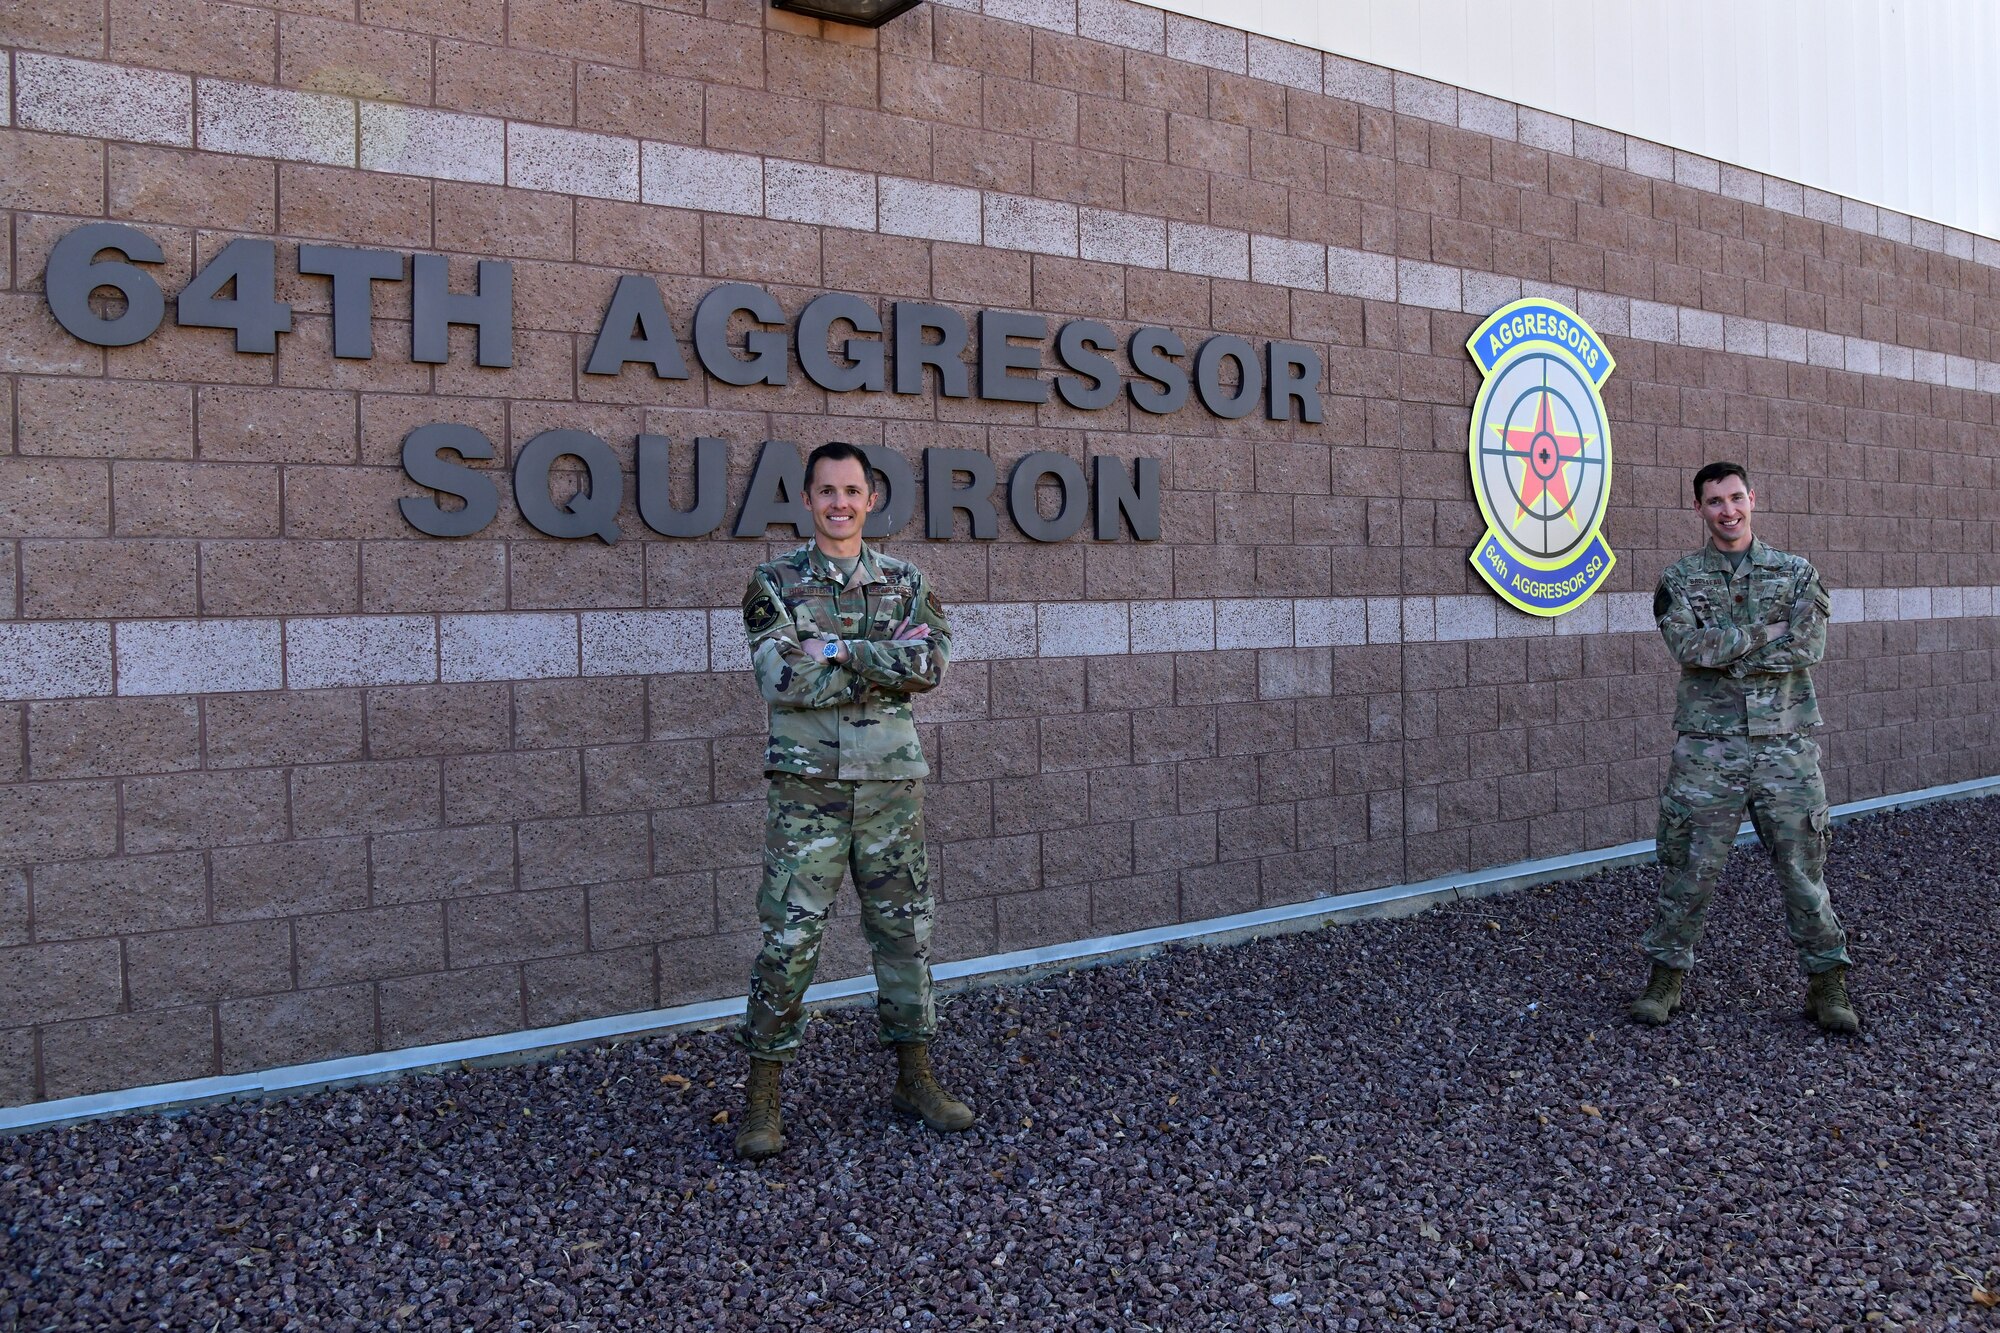 Maj. Scott Hollister and Maj. Jason Brosseau, 26th Space Aggressor Squadron, VADER-1, stand in front of the 64th Space Aggressor Squadron building Feb. 2, at Nellis Air Force Base, Nevada. Reservists, Hollister and Brosseau, deliver expertise in satellite communication and GPS electronic attack, and how those effects are integrated with air, air defense, and cyber to help create realistic enemy threats and tactics for those participating in Red Flag 21-1.